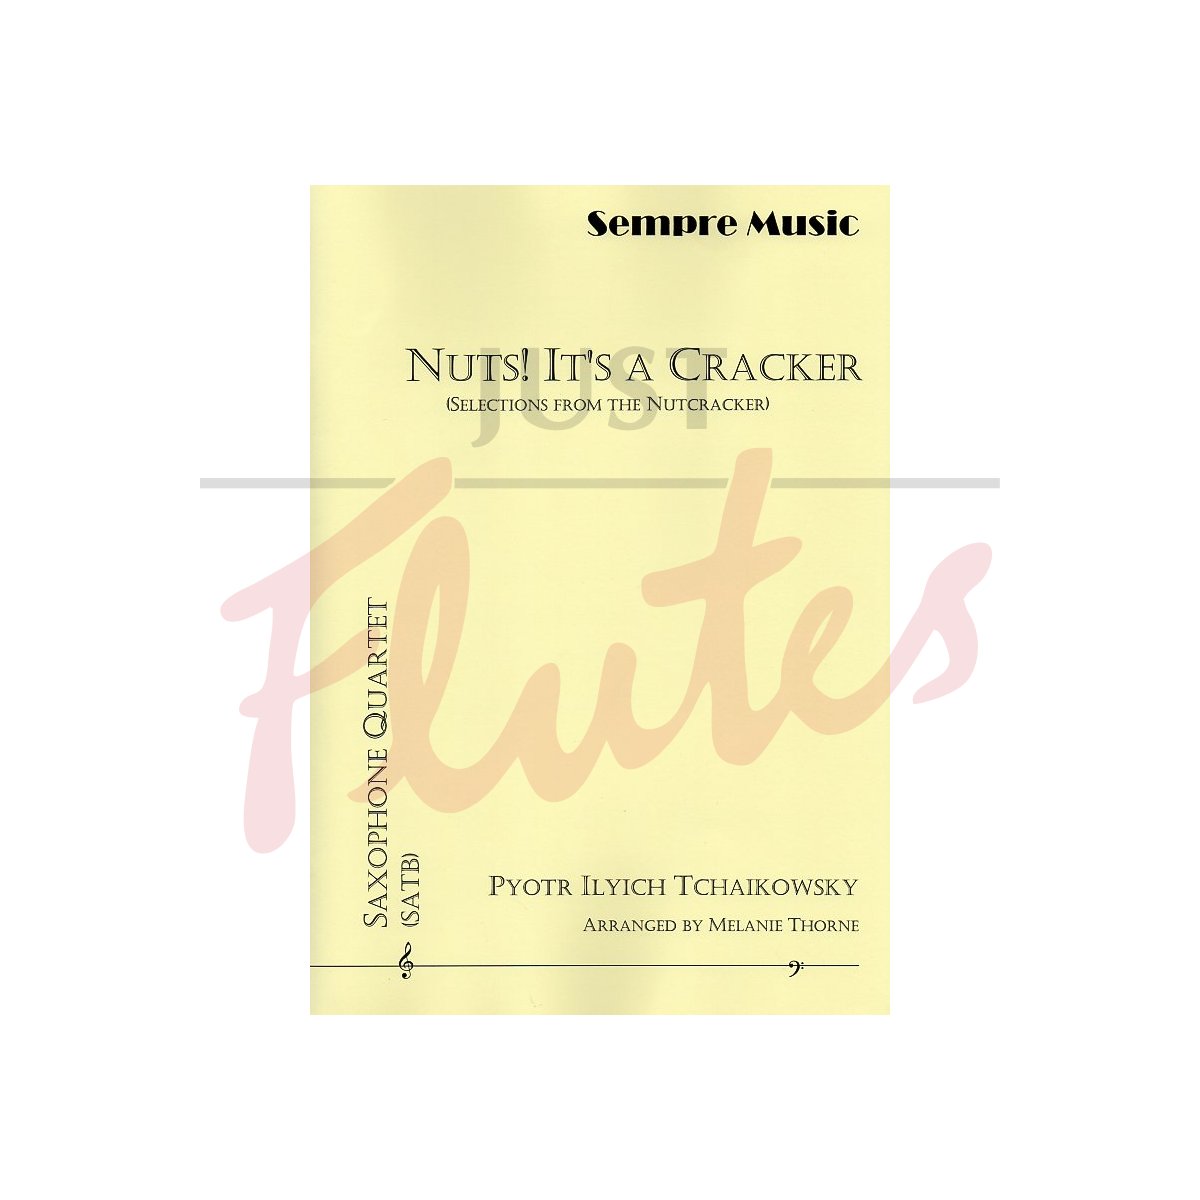 Nuts! It's a Cracker - Selections from The Nutcracker